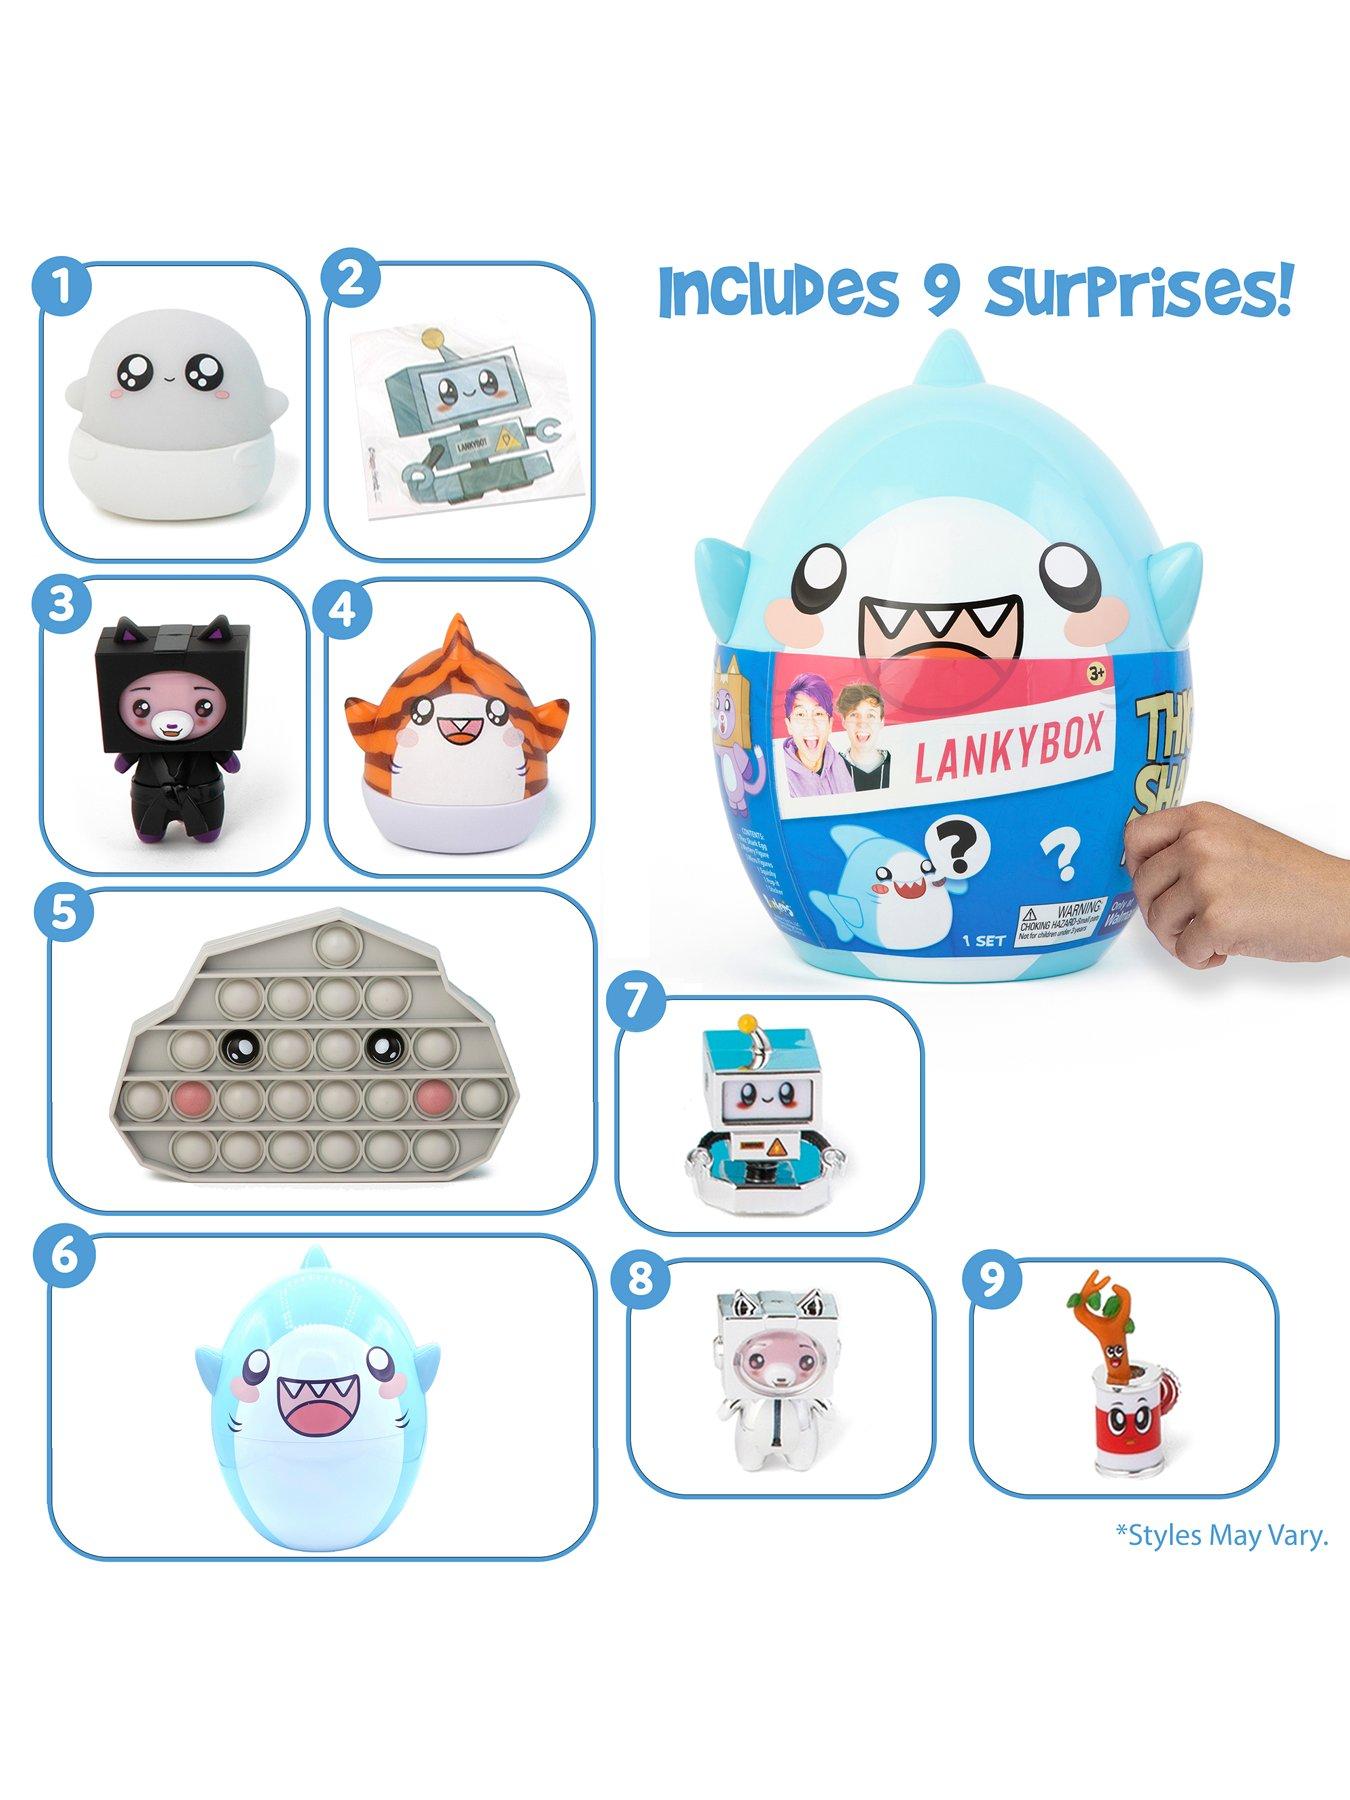  LankyBox Mini Mystery Box, for The Biggest Fans, 2 Mystery  Figures, 1 Squishy Figure, a pop-it, and 3 Stickers : Toys & Games